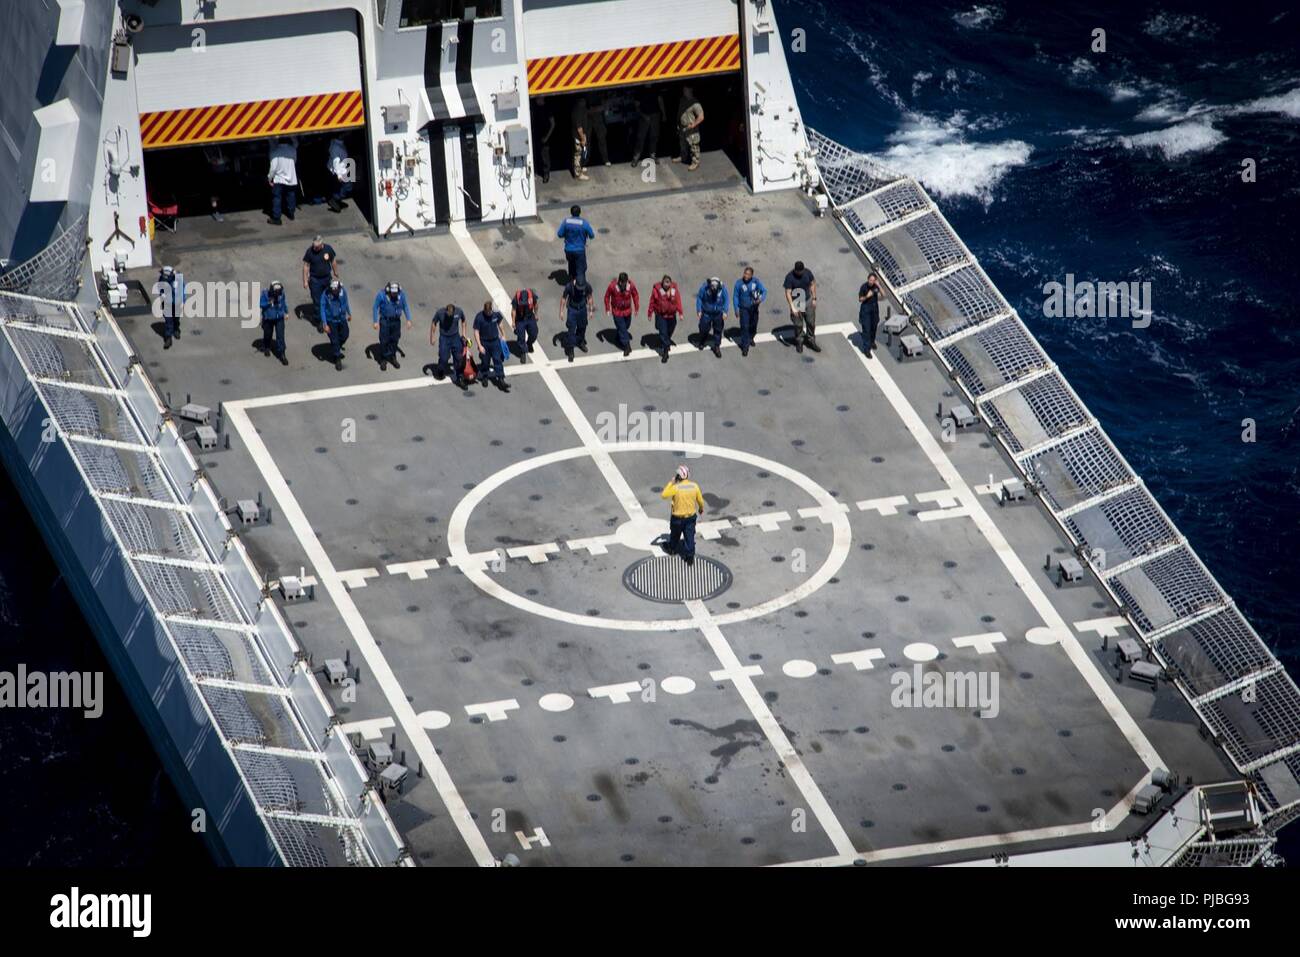 PACIFIC OCEAN (July 11, 2018) The crew of U.S. Coast Guard Cutter Bertholf (WMSL 750) inspects the flight deck prior to a medical evacuation exercise in during Rim of the Pacific (RIMPAC) exercise. Twenty-five nations, more than 46 ships and 5 submarines, about 200 aircraft and 25,000 personnel are participating in RIMPAC from June 27 to Aug. 2 in and around the Hawaiian Island and Southern California.  The world’s largest international maritime exercise, RIMPAC provides a unique training opportunity while fostering and sustaining cooperative relationships among participants critical to ensuri Stock Photo